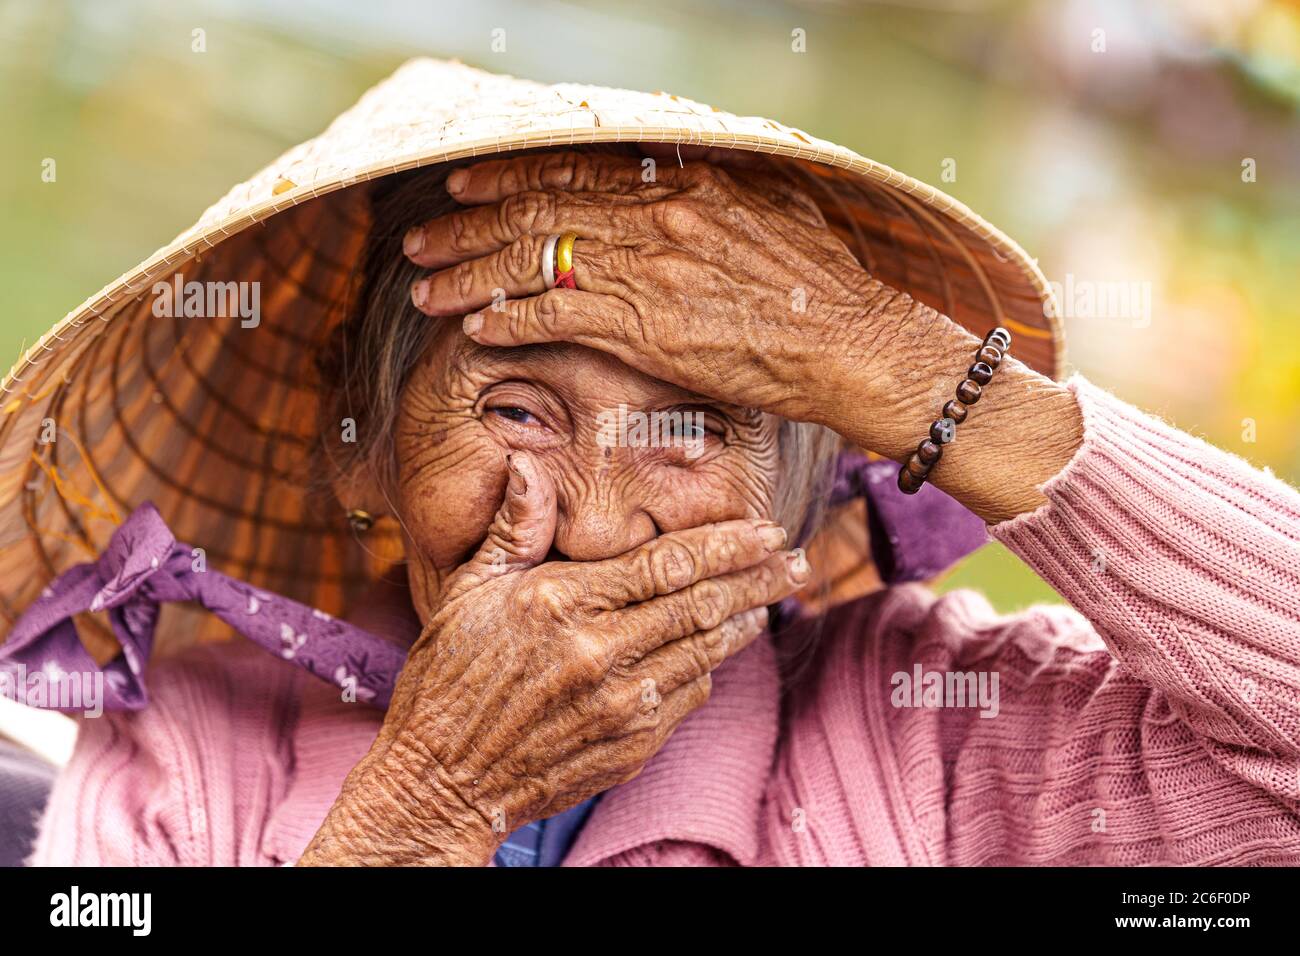 Old Vietnamese woman in violet sweater puts her hands to her face to cover her mouth and forehead. Stock Photo